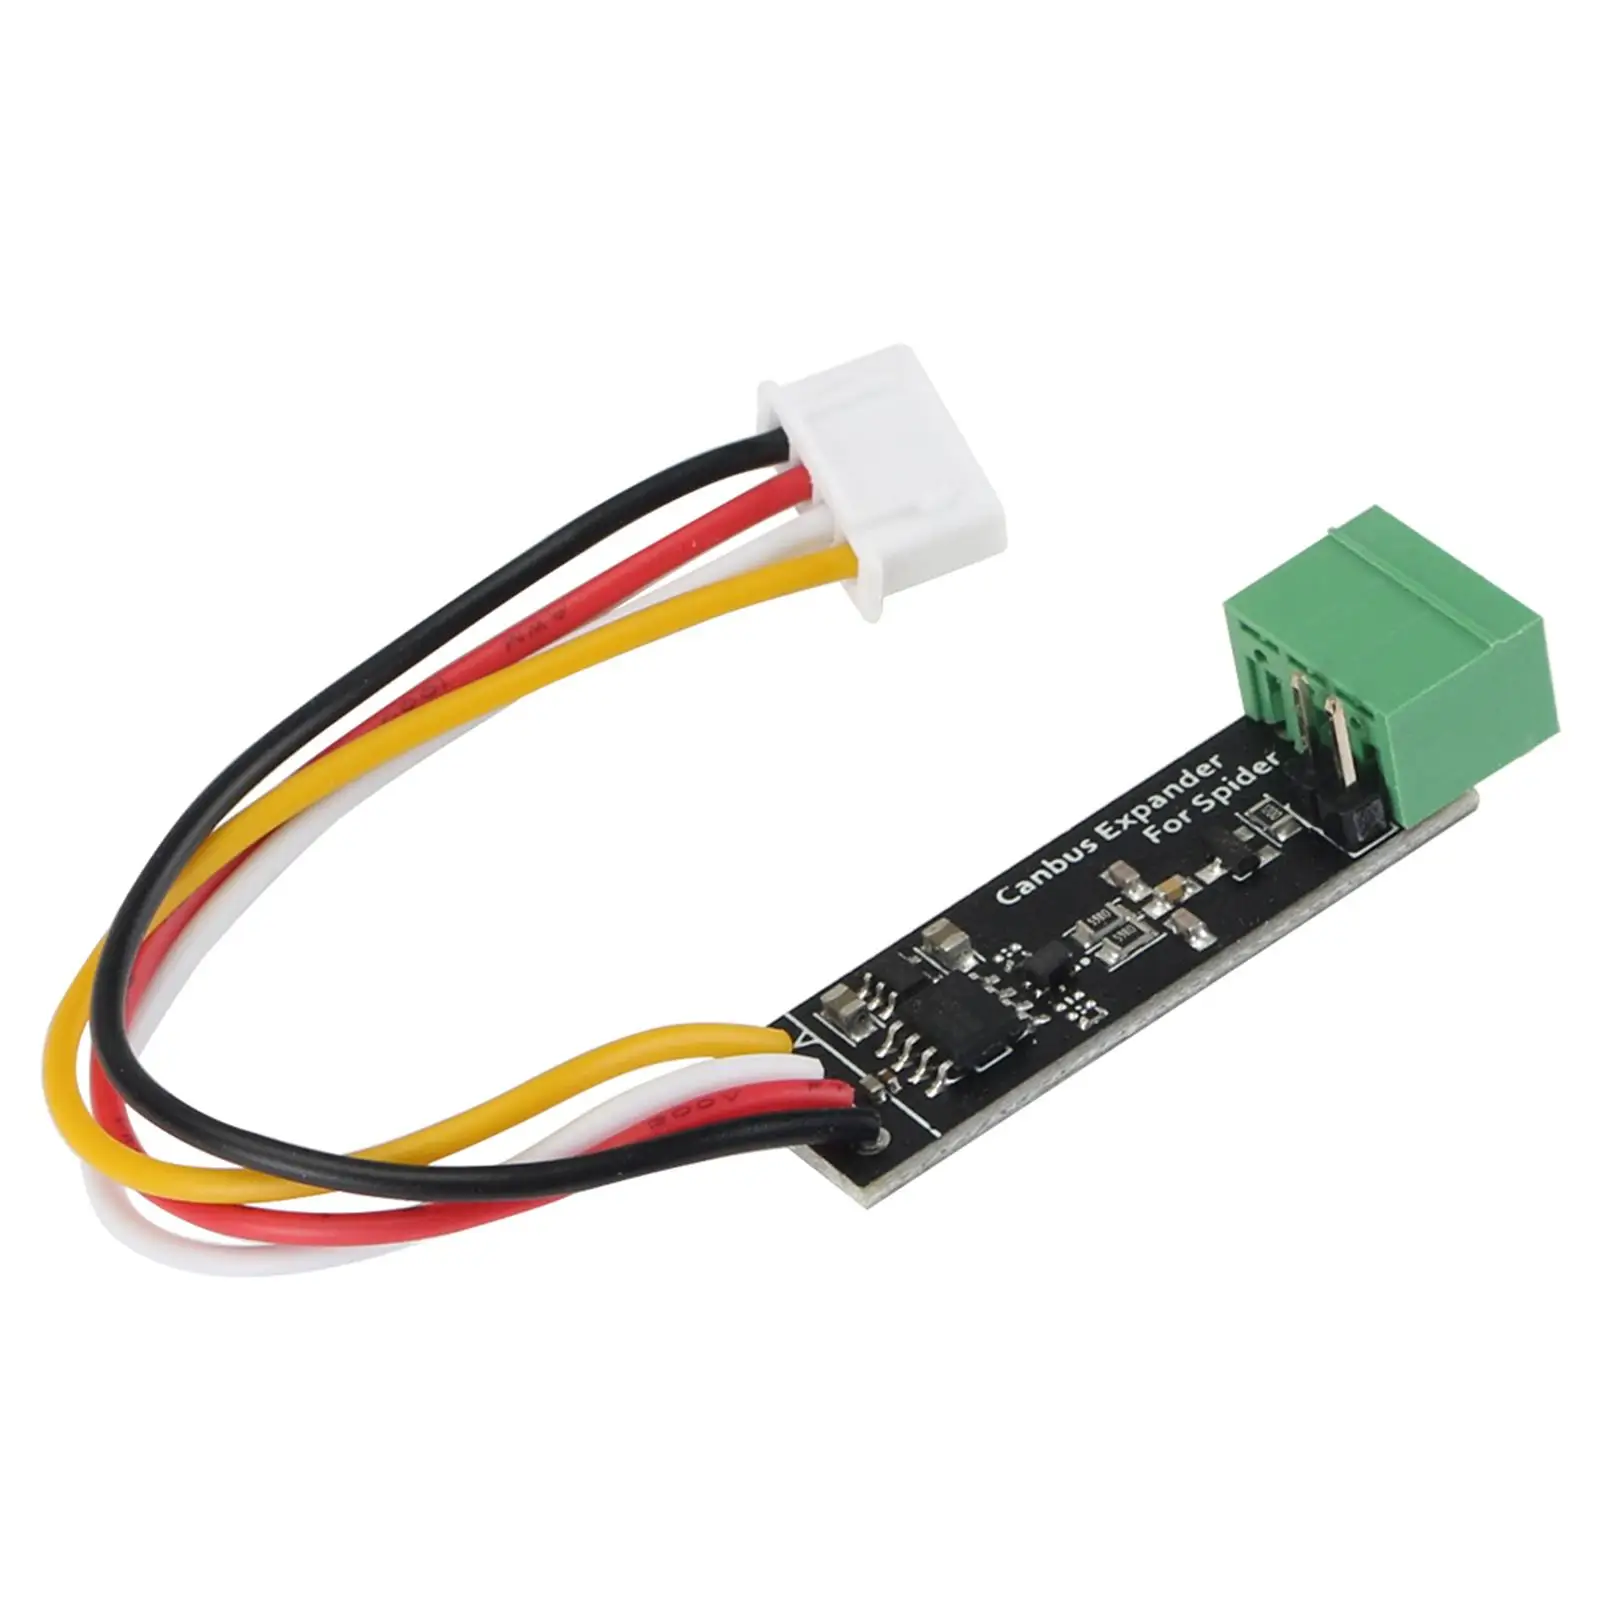 Canbus Expander Module Easy to Install Direct Replaces for Spider Board